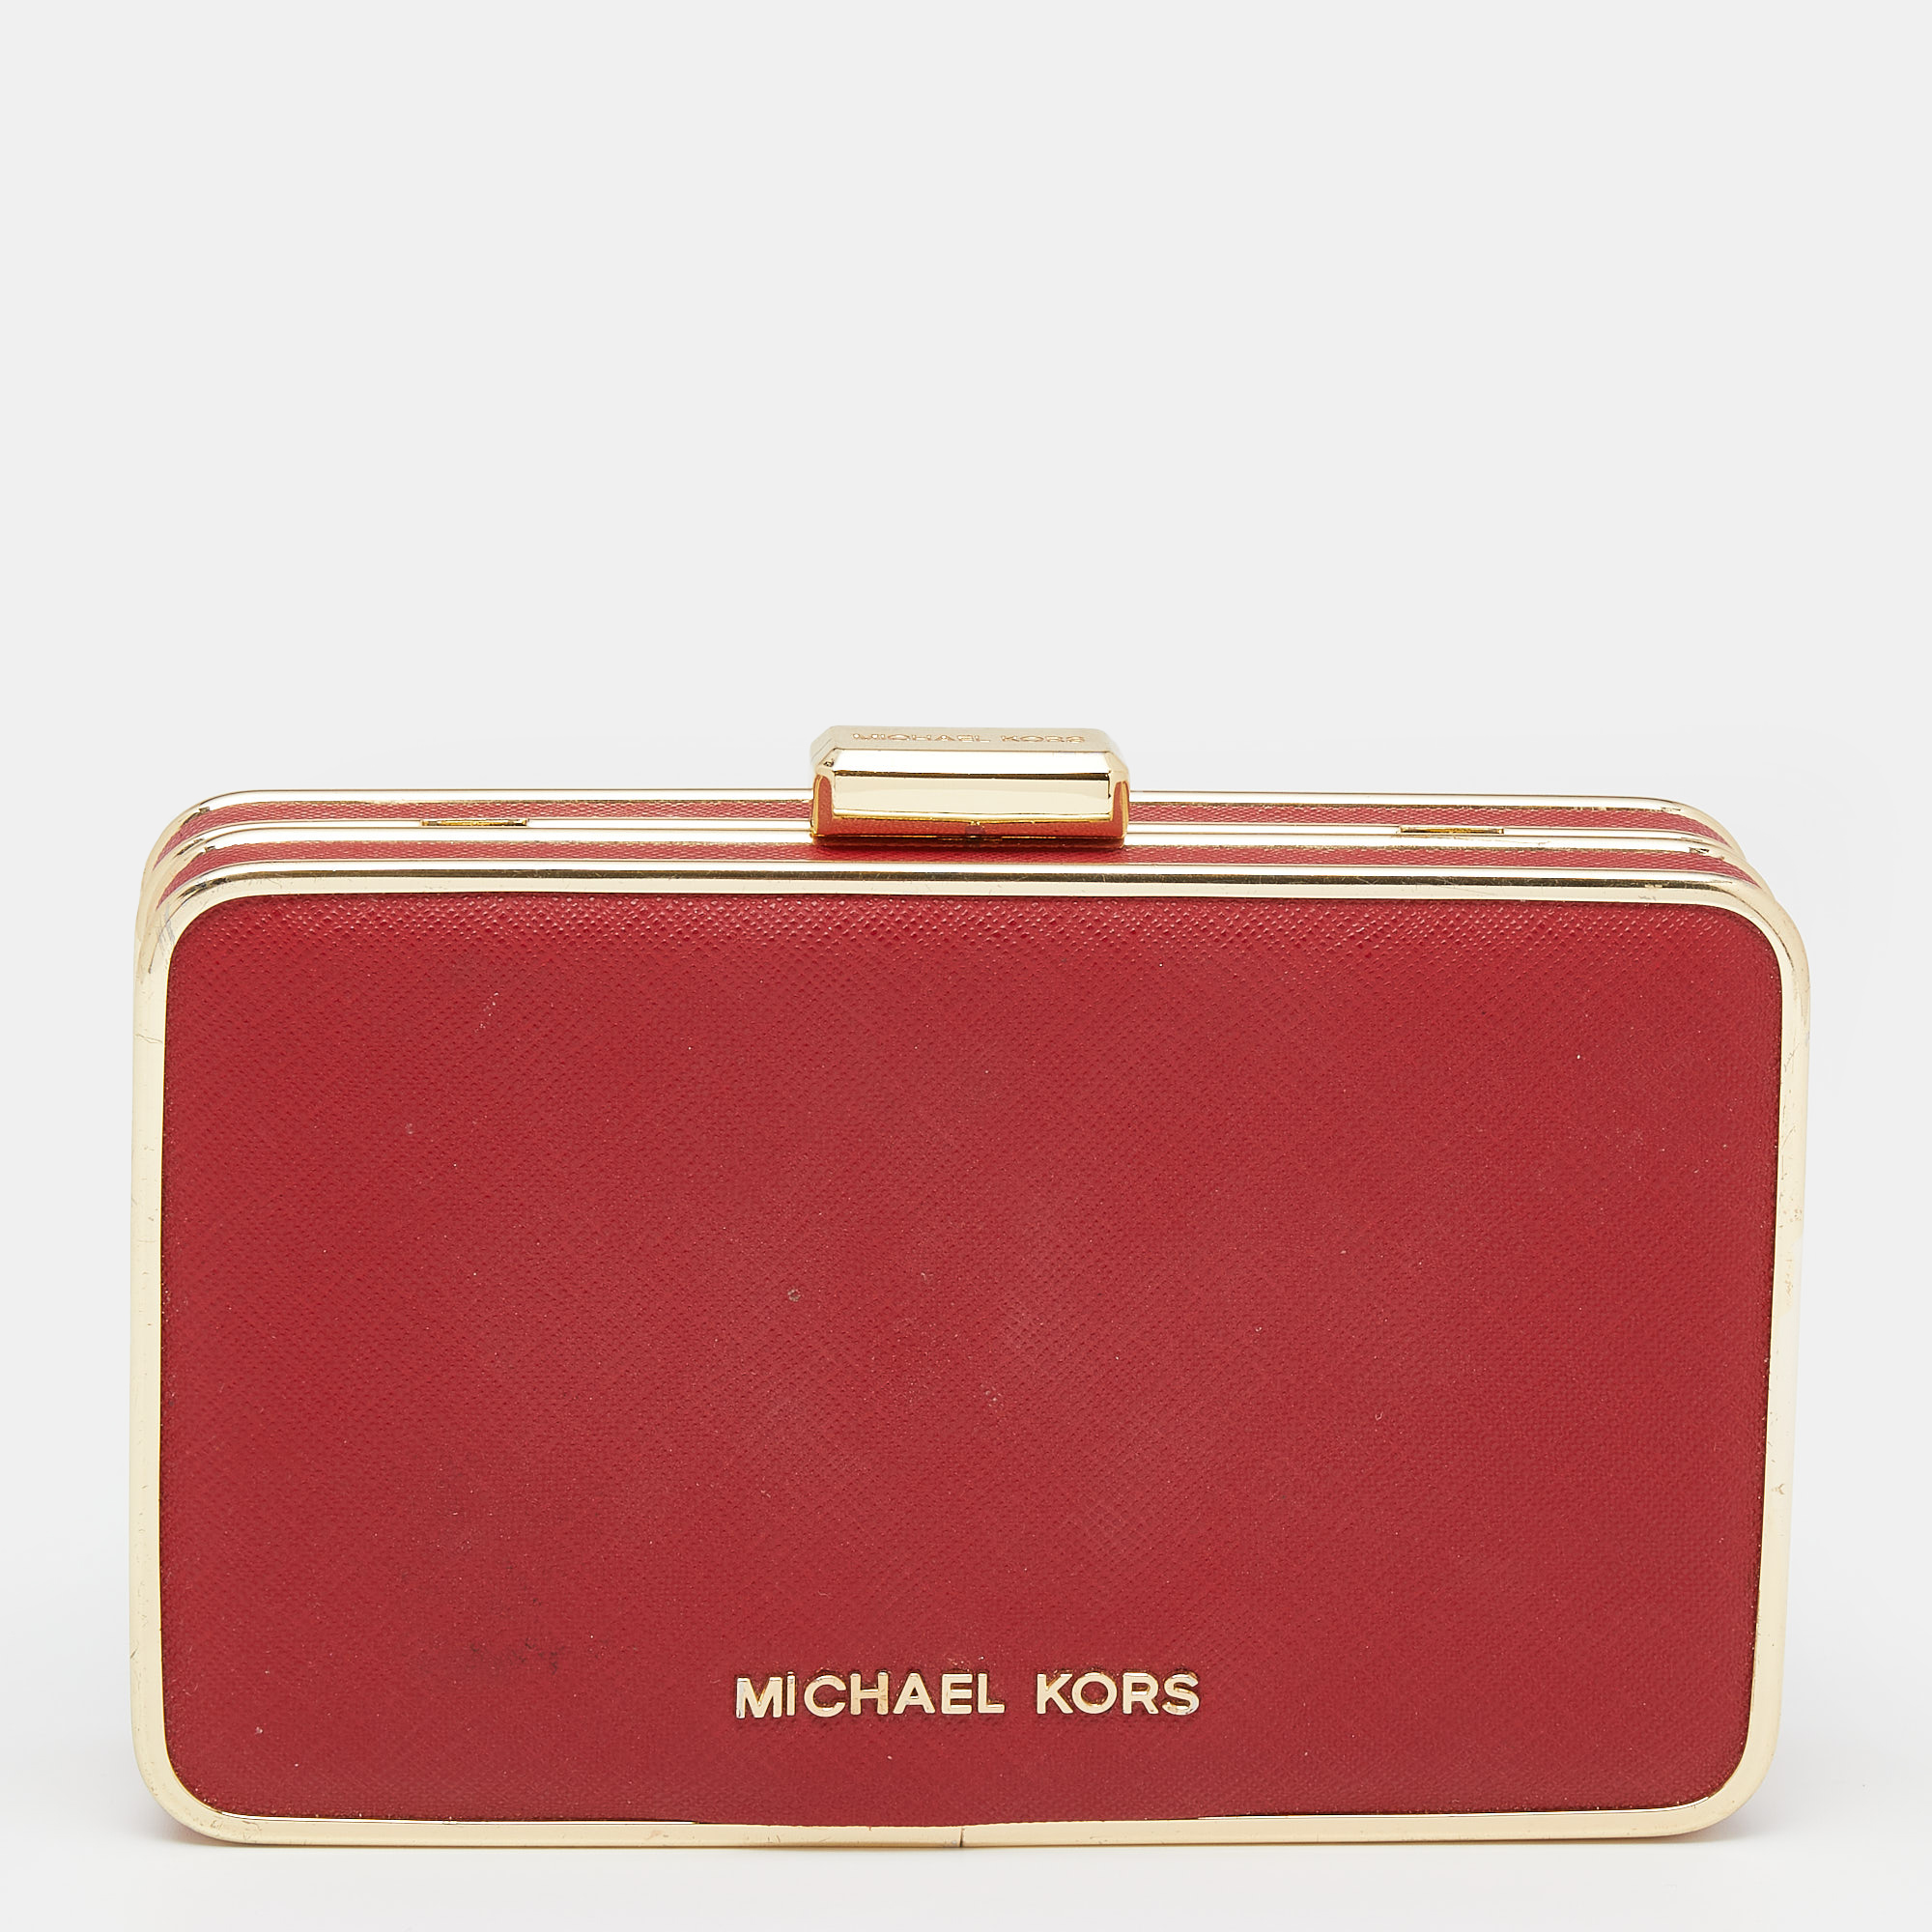 Michael Kors Red Saffiano Leather Minaudiere Clutch